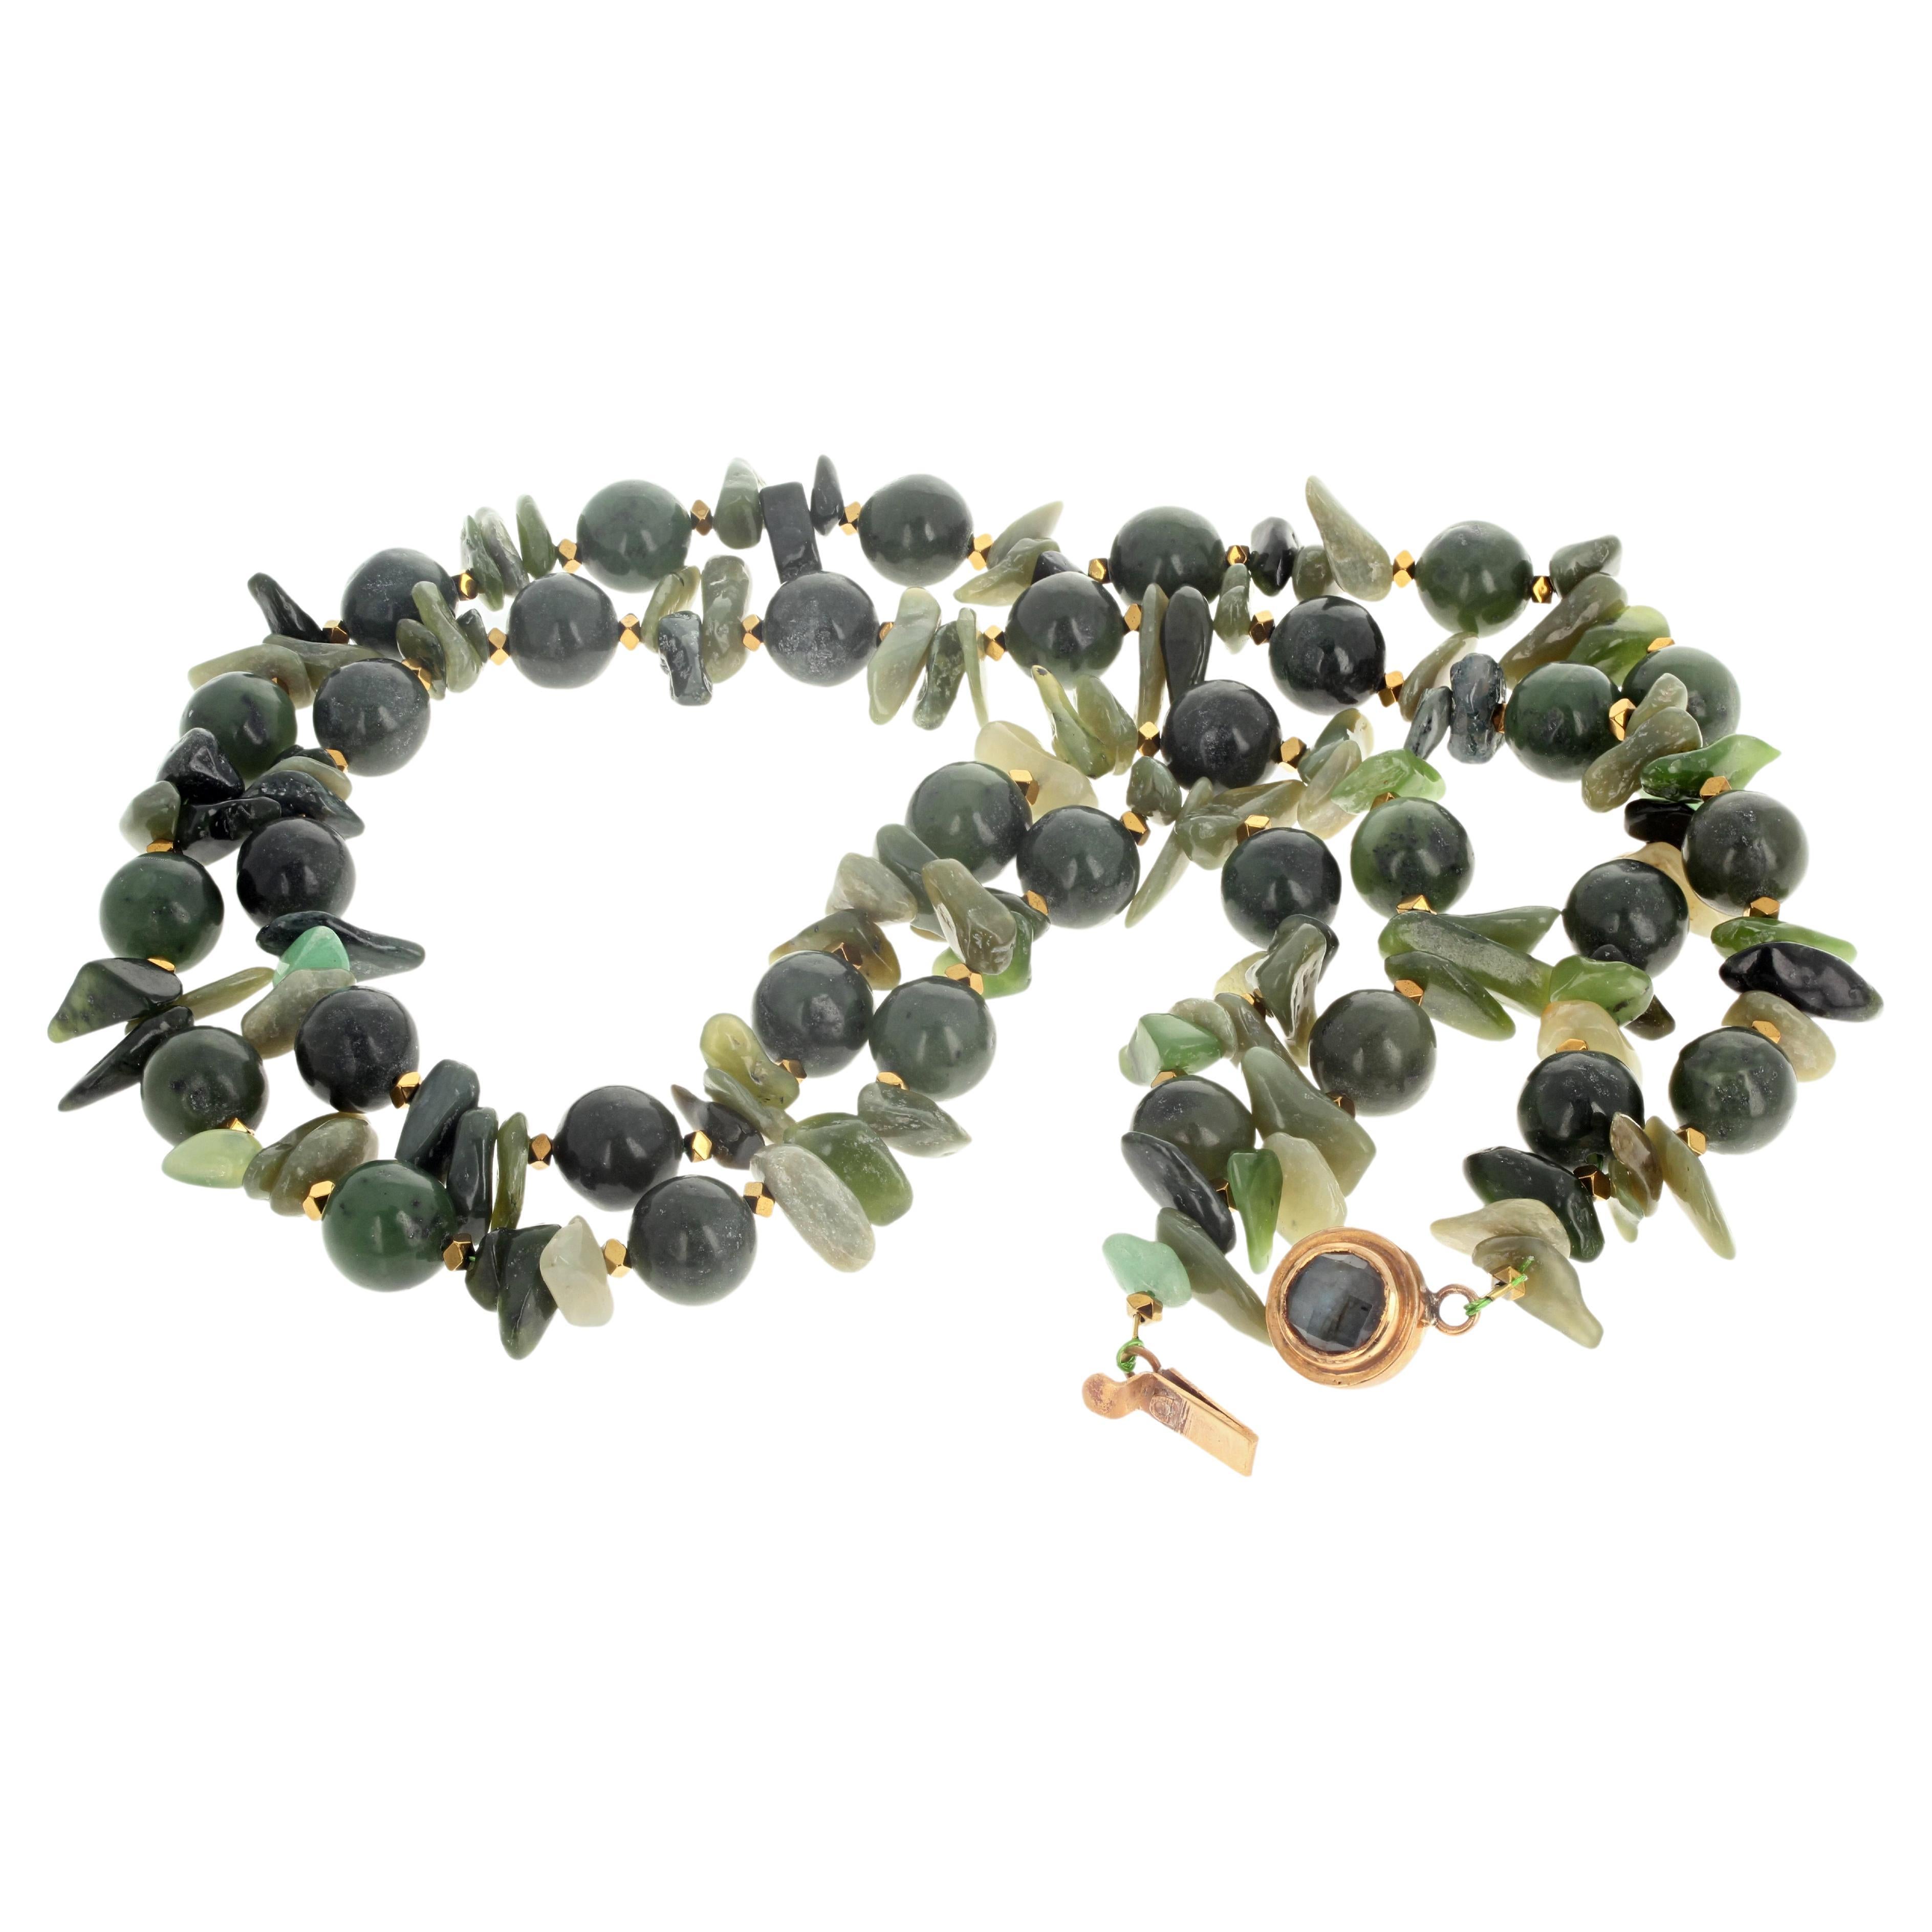 These Jade glow magnificently in the light on this beautiful double strand 19 inch long necklace.  The highly polished round Jade are approximately 12mm.  The natural Jade chips are all different sizes with the largest approximately 18mm.  The clasp